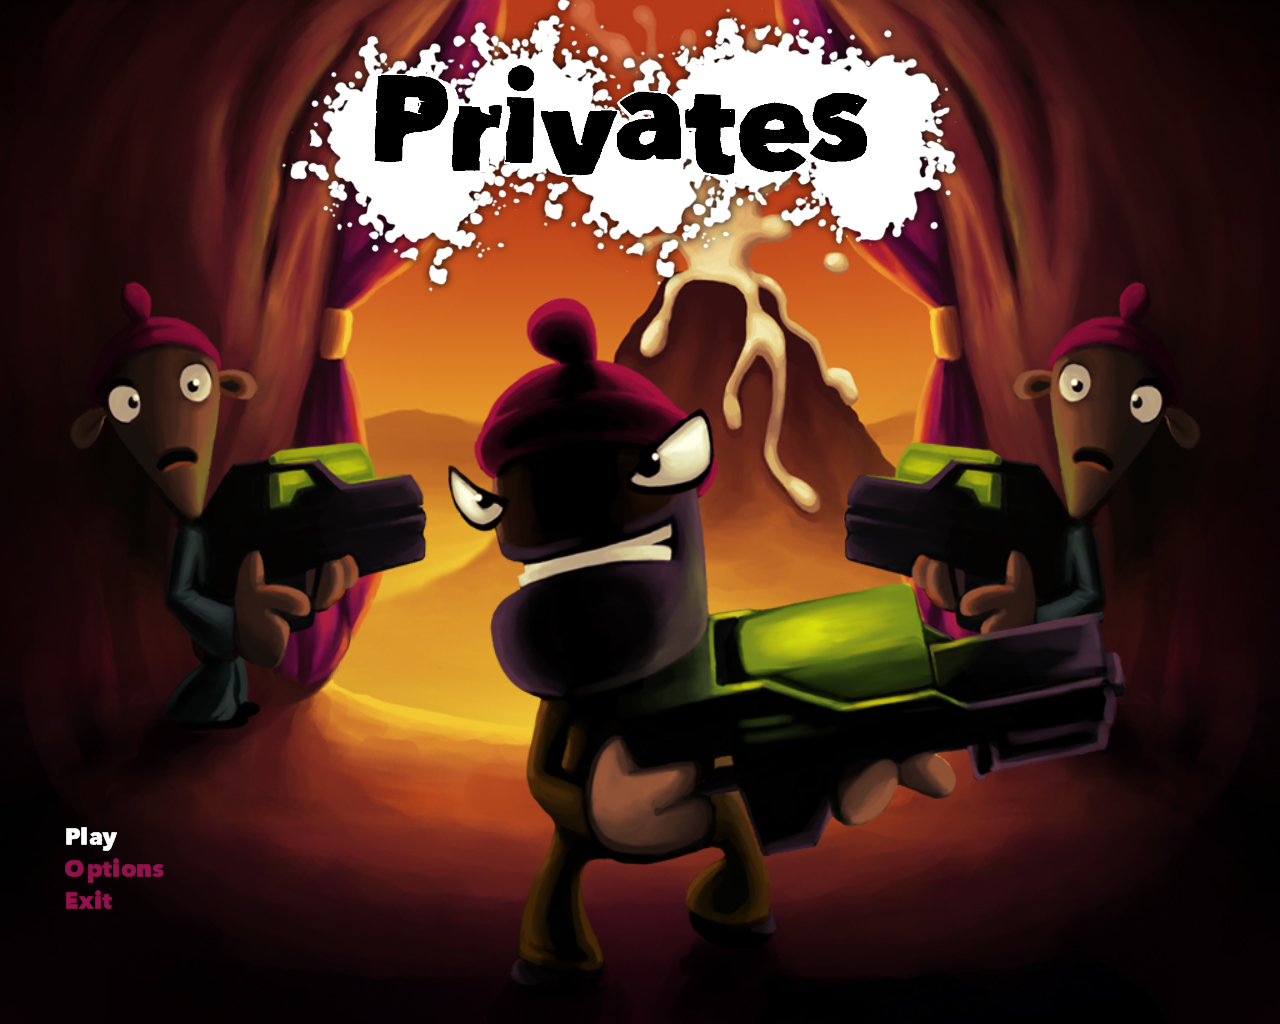 Play private